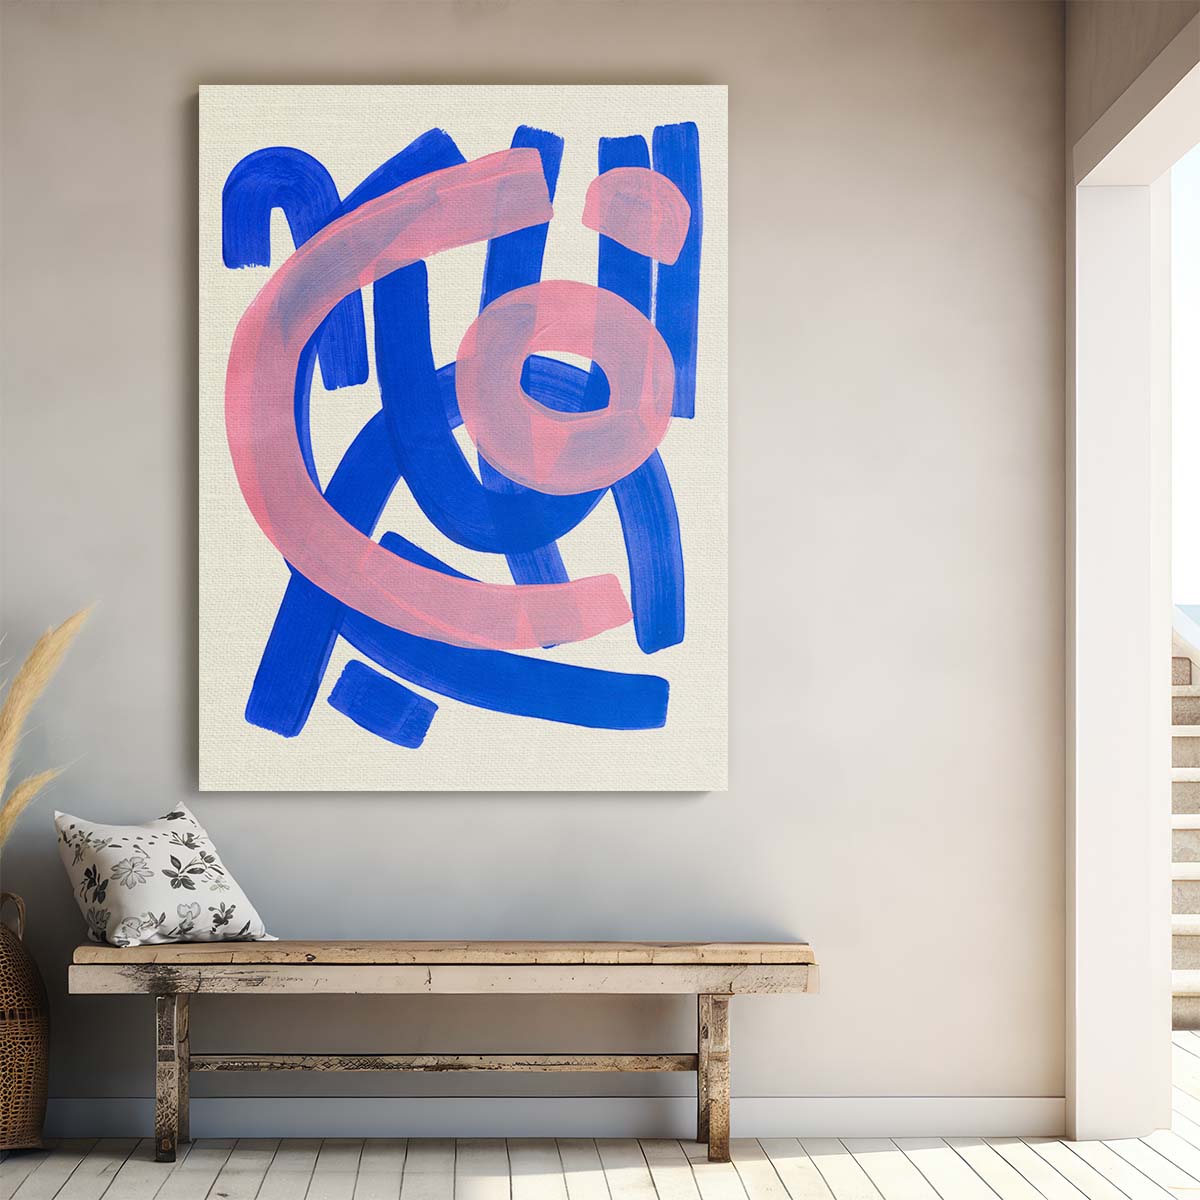 Ejaaz Colorful Geometric Abstract Illustration Poster, Pink Blue by Luxuriance Designs, made in USA